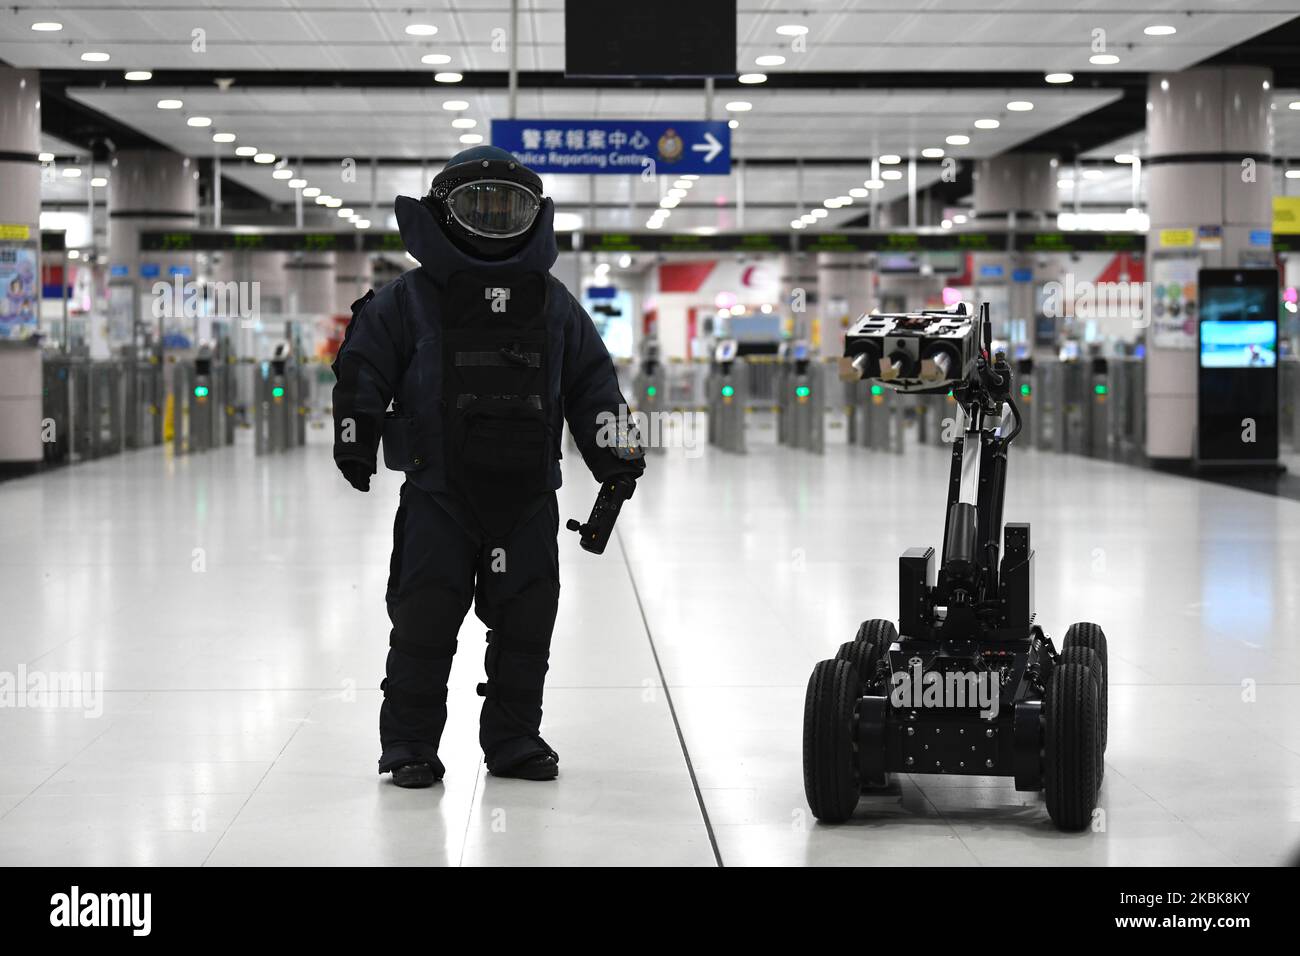 A police officer in Explosive Ordnance Disposal (EOD) suit and a Bomb Disposal Robot are seen during an inter-departmental counter-terrorism exercise in Lok Ma Chau Spur Line Control Point on March 20, 2020 in Hong Kong, China. Today Hong Kong Conducted an inter-departmental counter-terrorism exercise, codenamed “CATCHMOUNT” at Lok Ma Chau Spur Line Control Point . (Photo by Vernon Yuen/NurPhoto) Stock Photo